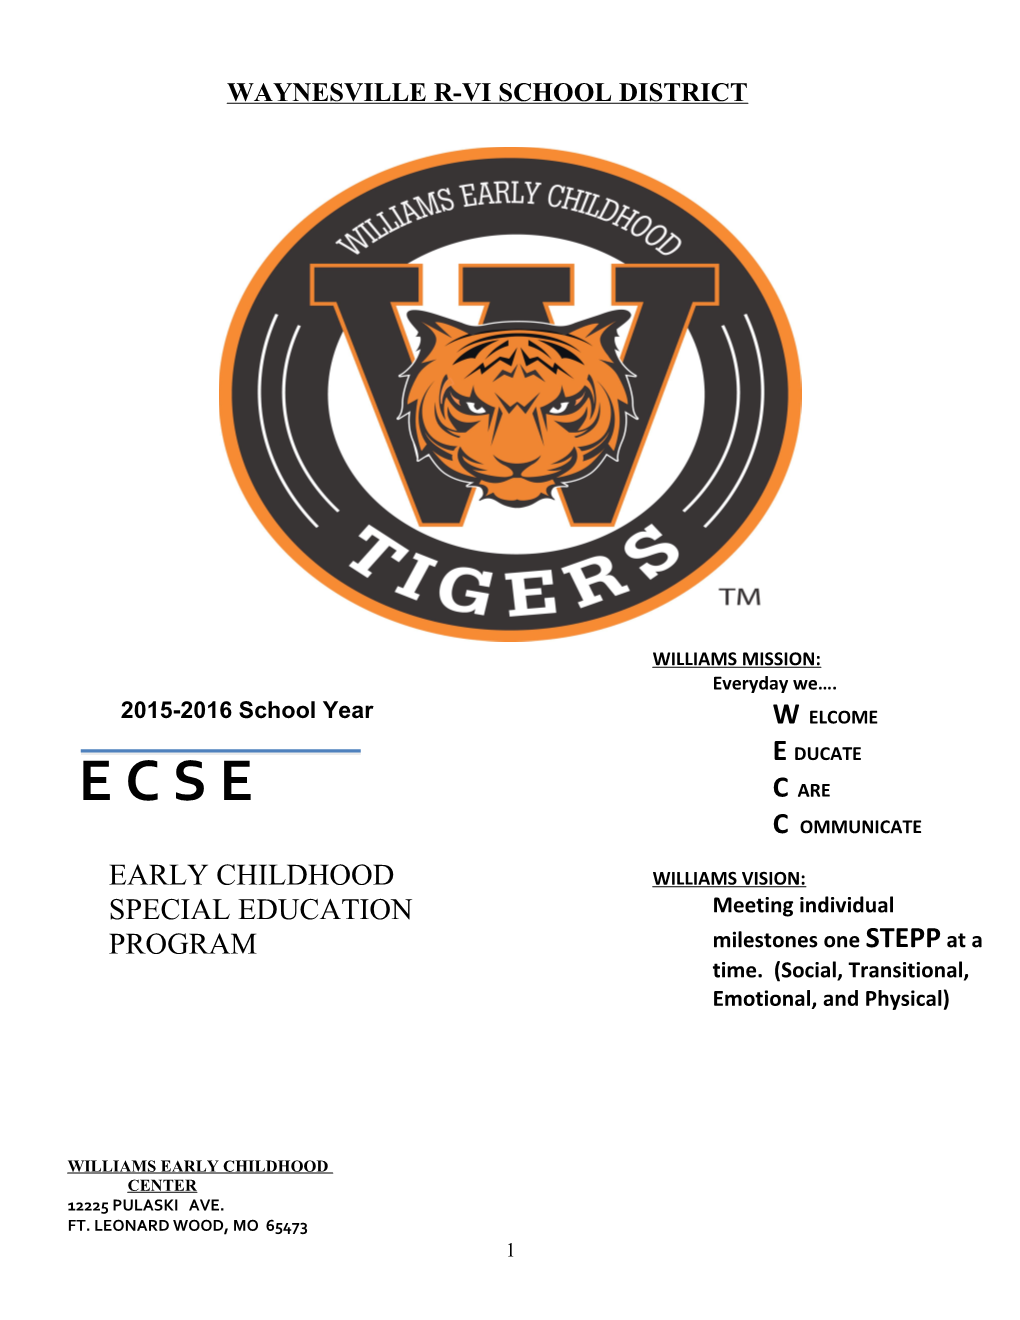 INTRODUCTION the Early Childhood Special Education Program (ECSE) Is a Part of the Waynesville